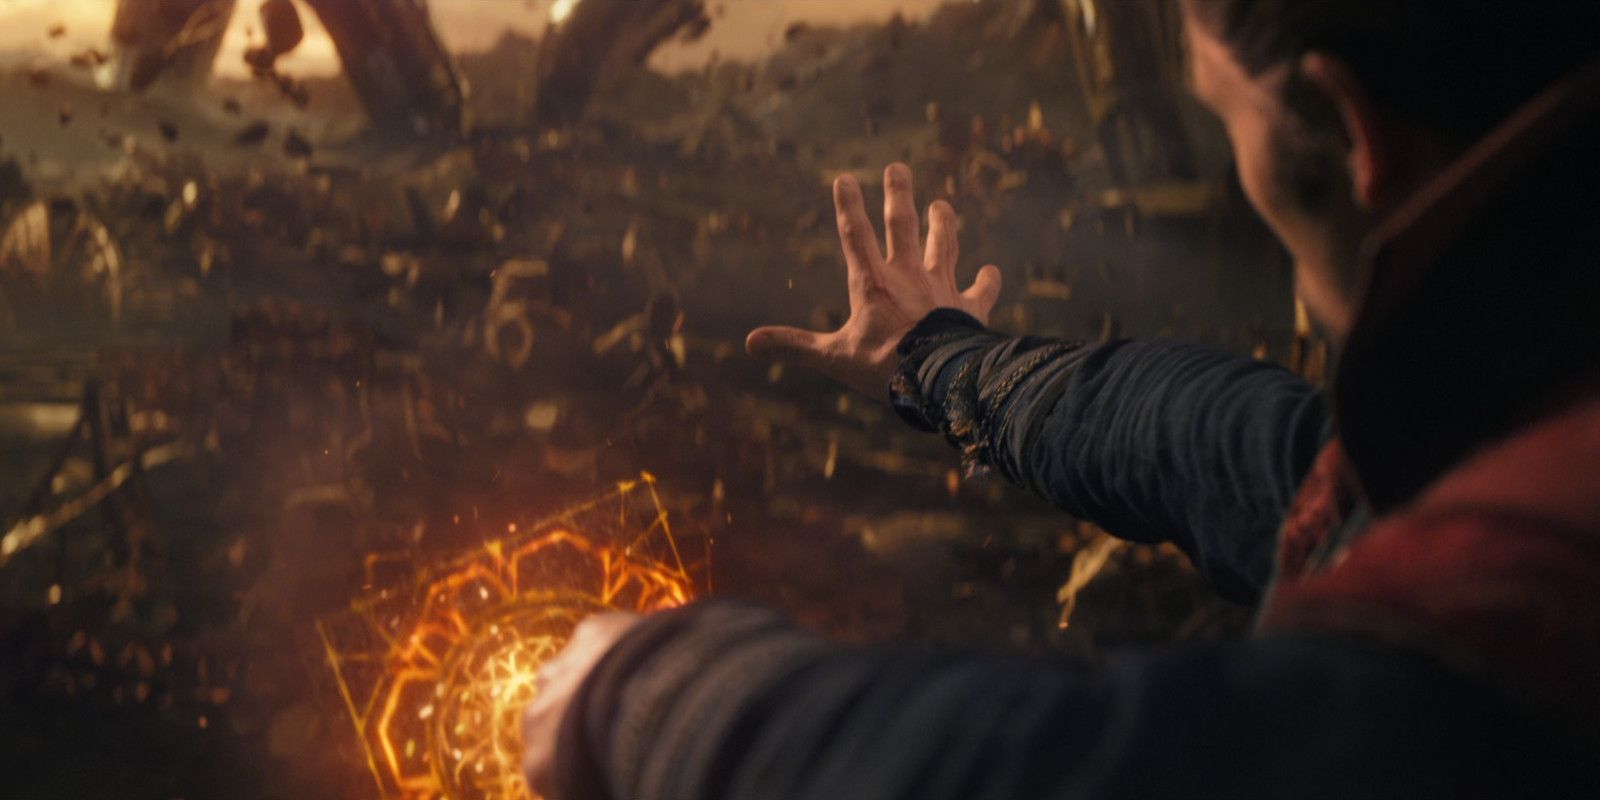 Doctor Strange 10 Best Quotes In The MCU (So Far)